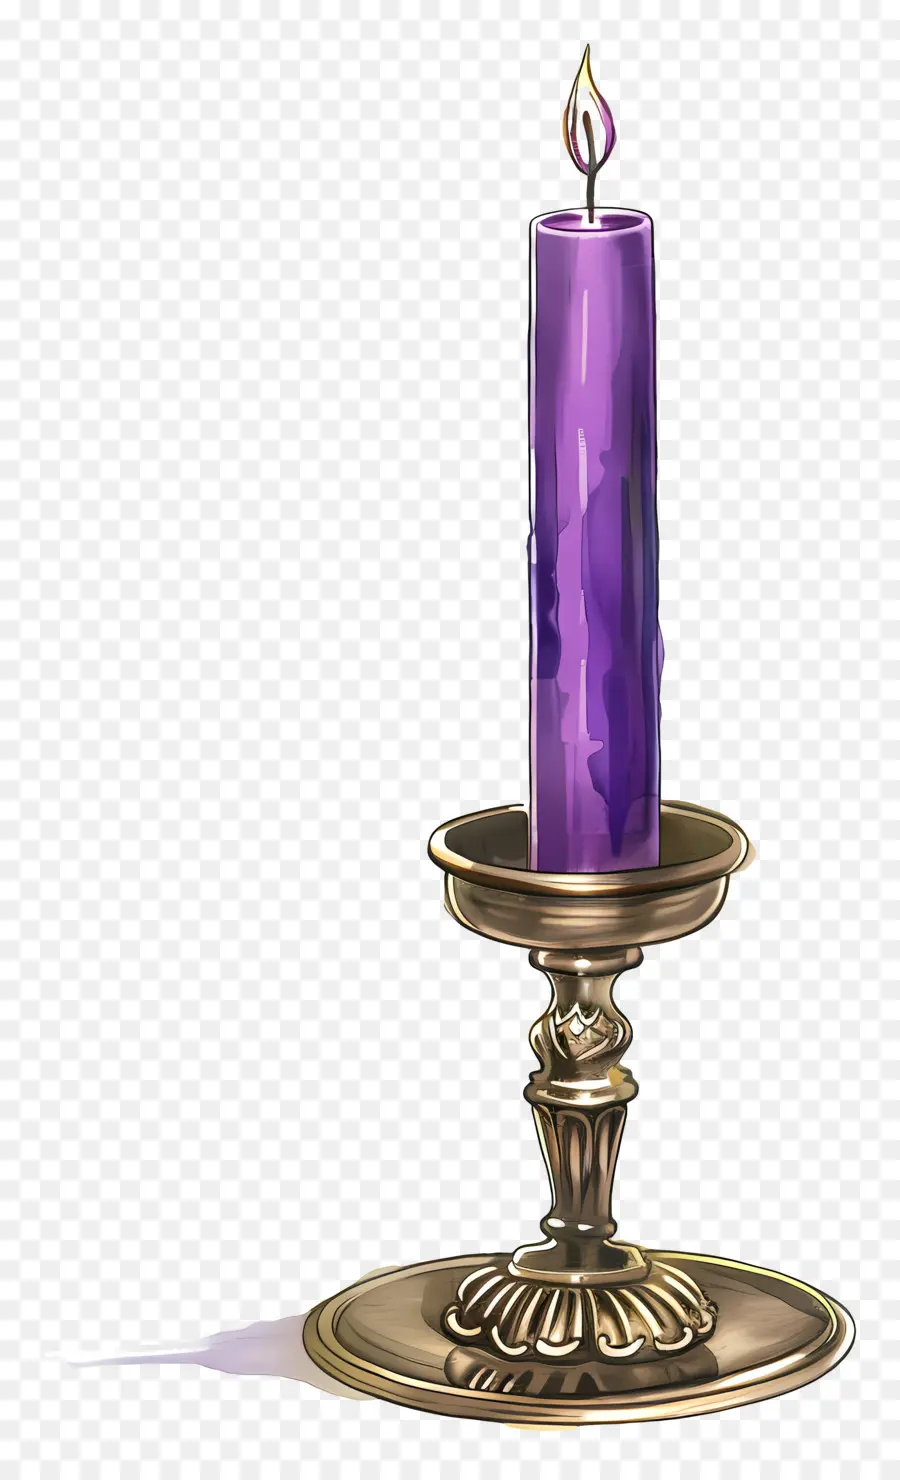 candle in candlestick candle purple flame gold-plated